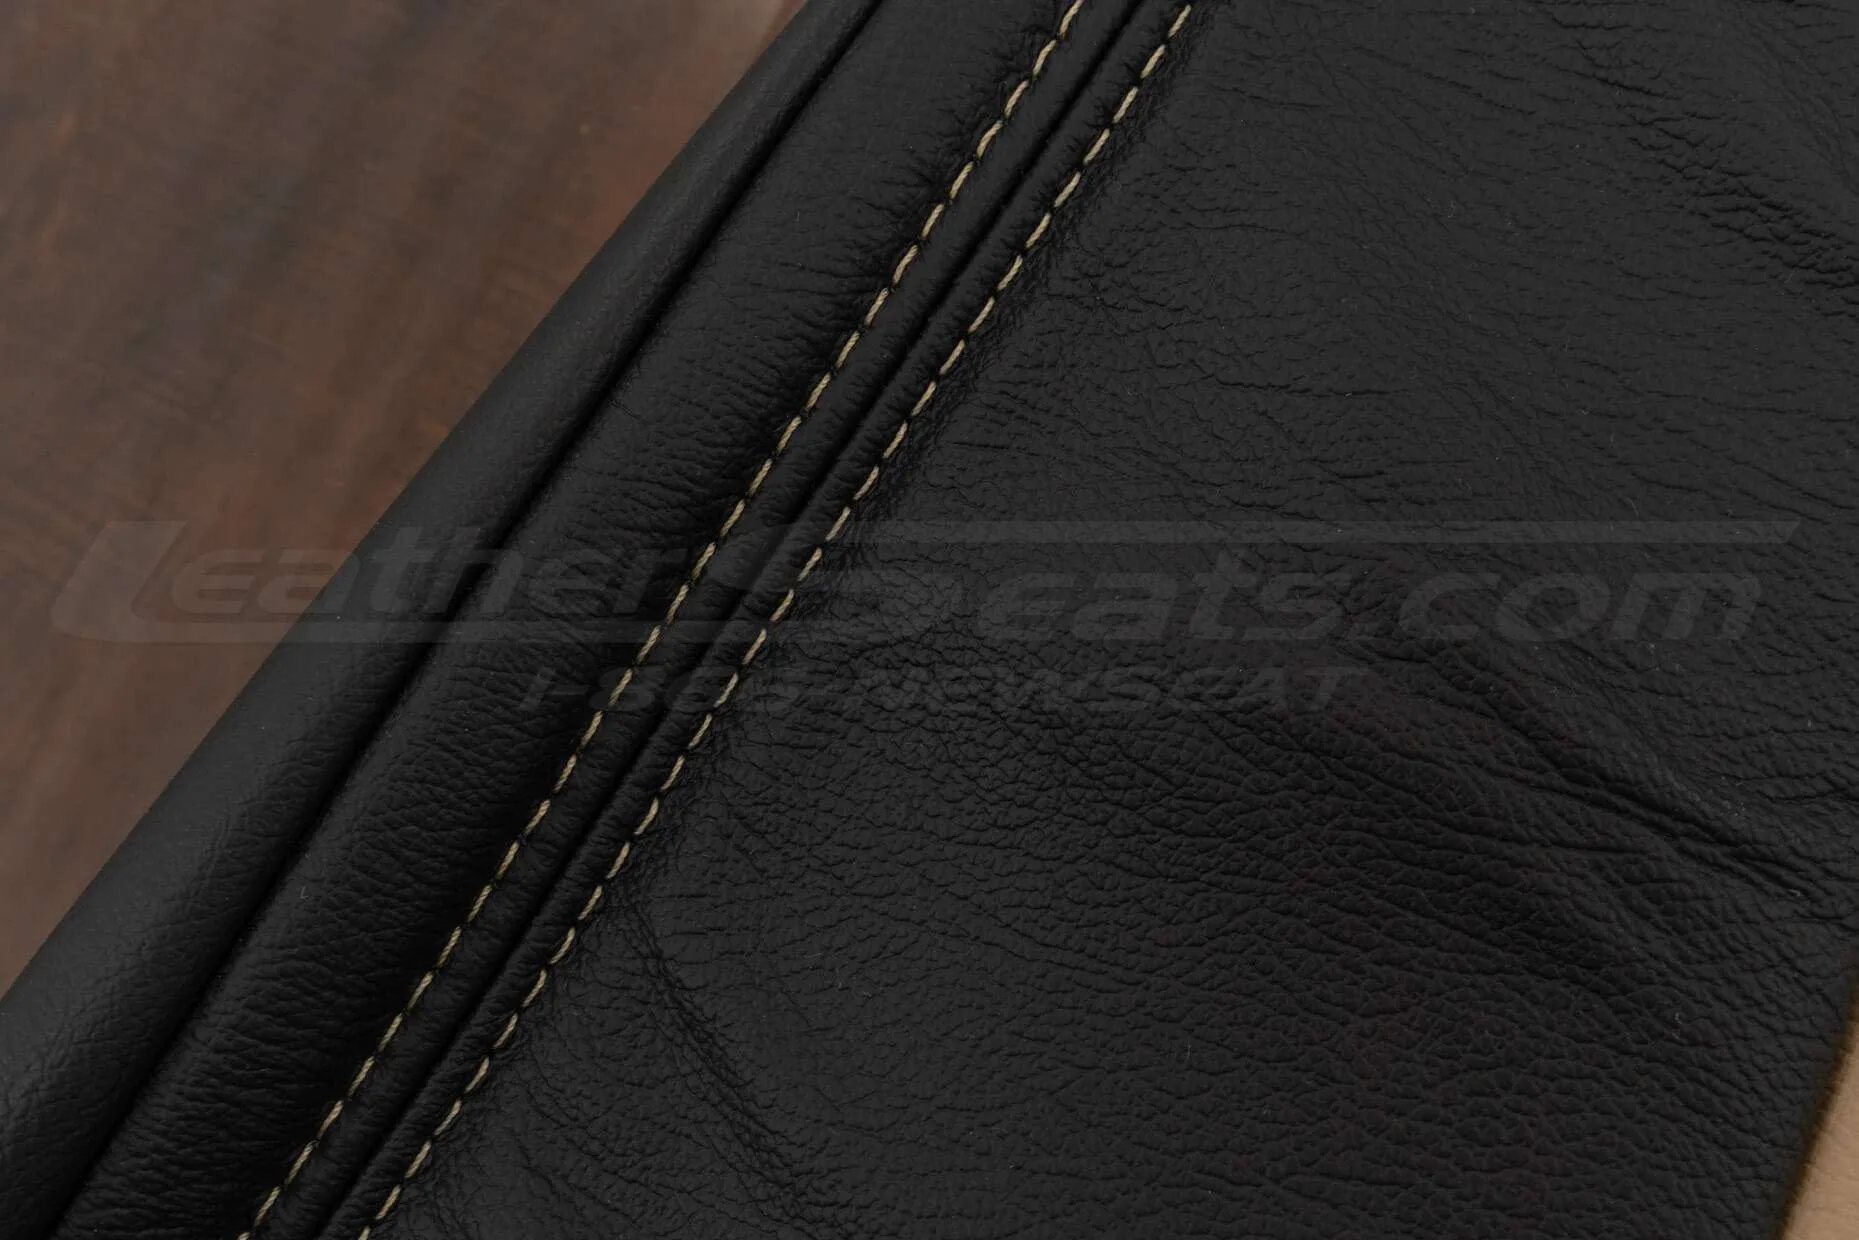 Bisque double stitching on Black leather